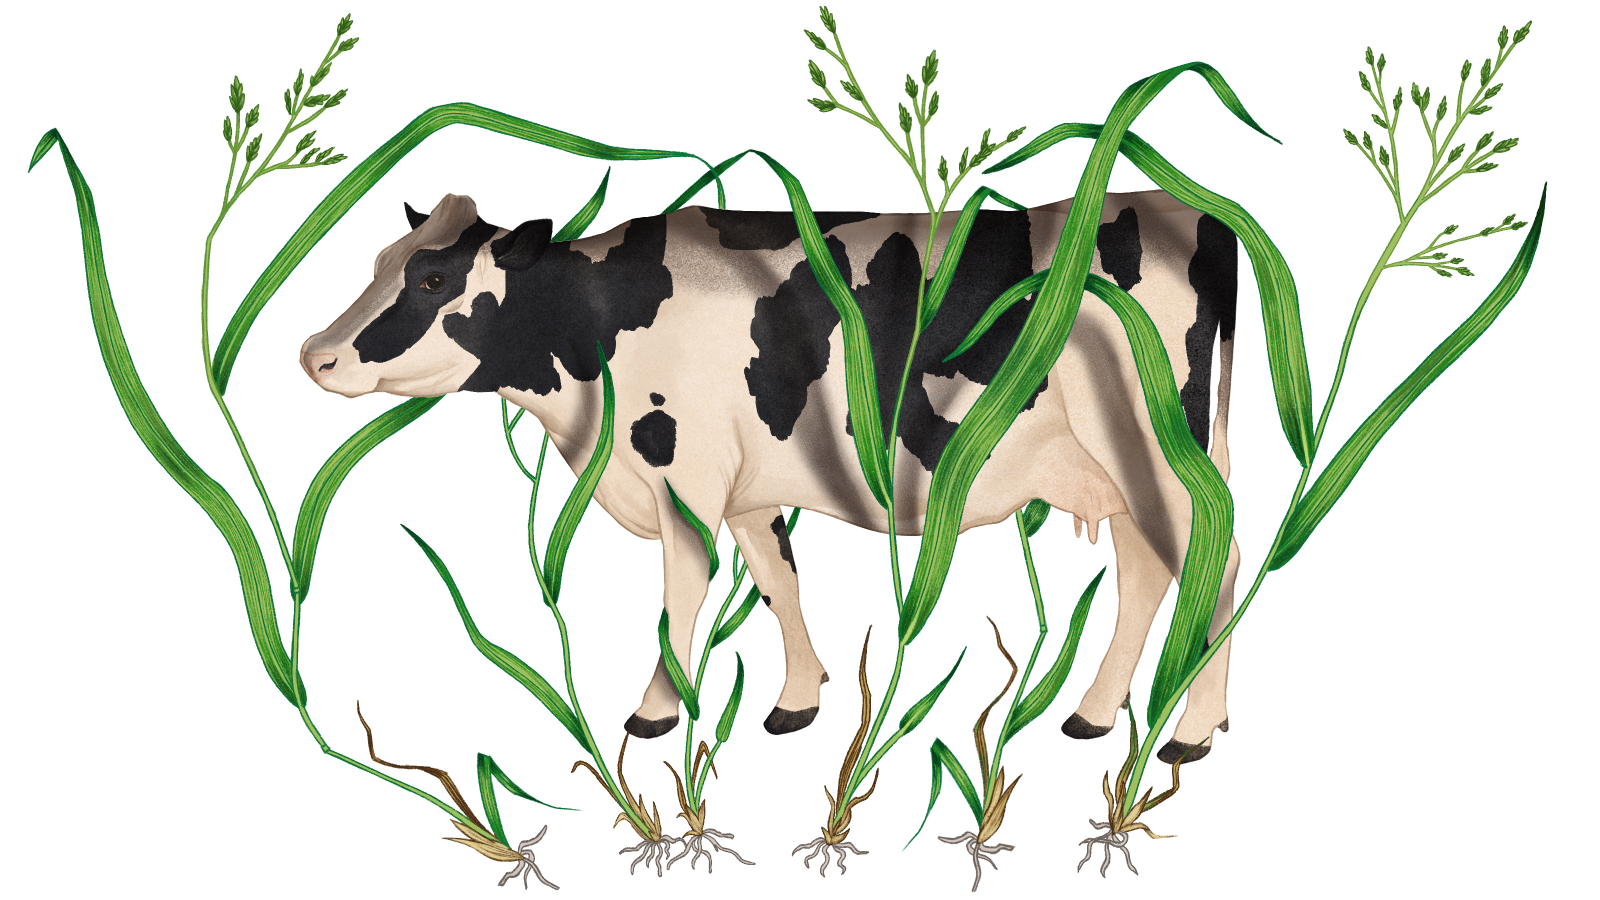 An illustration of a cow with sprigs of tall grass placed over it